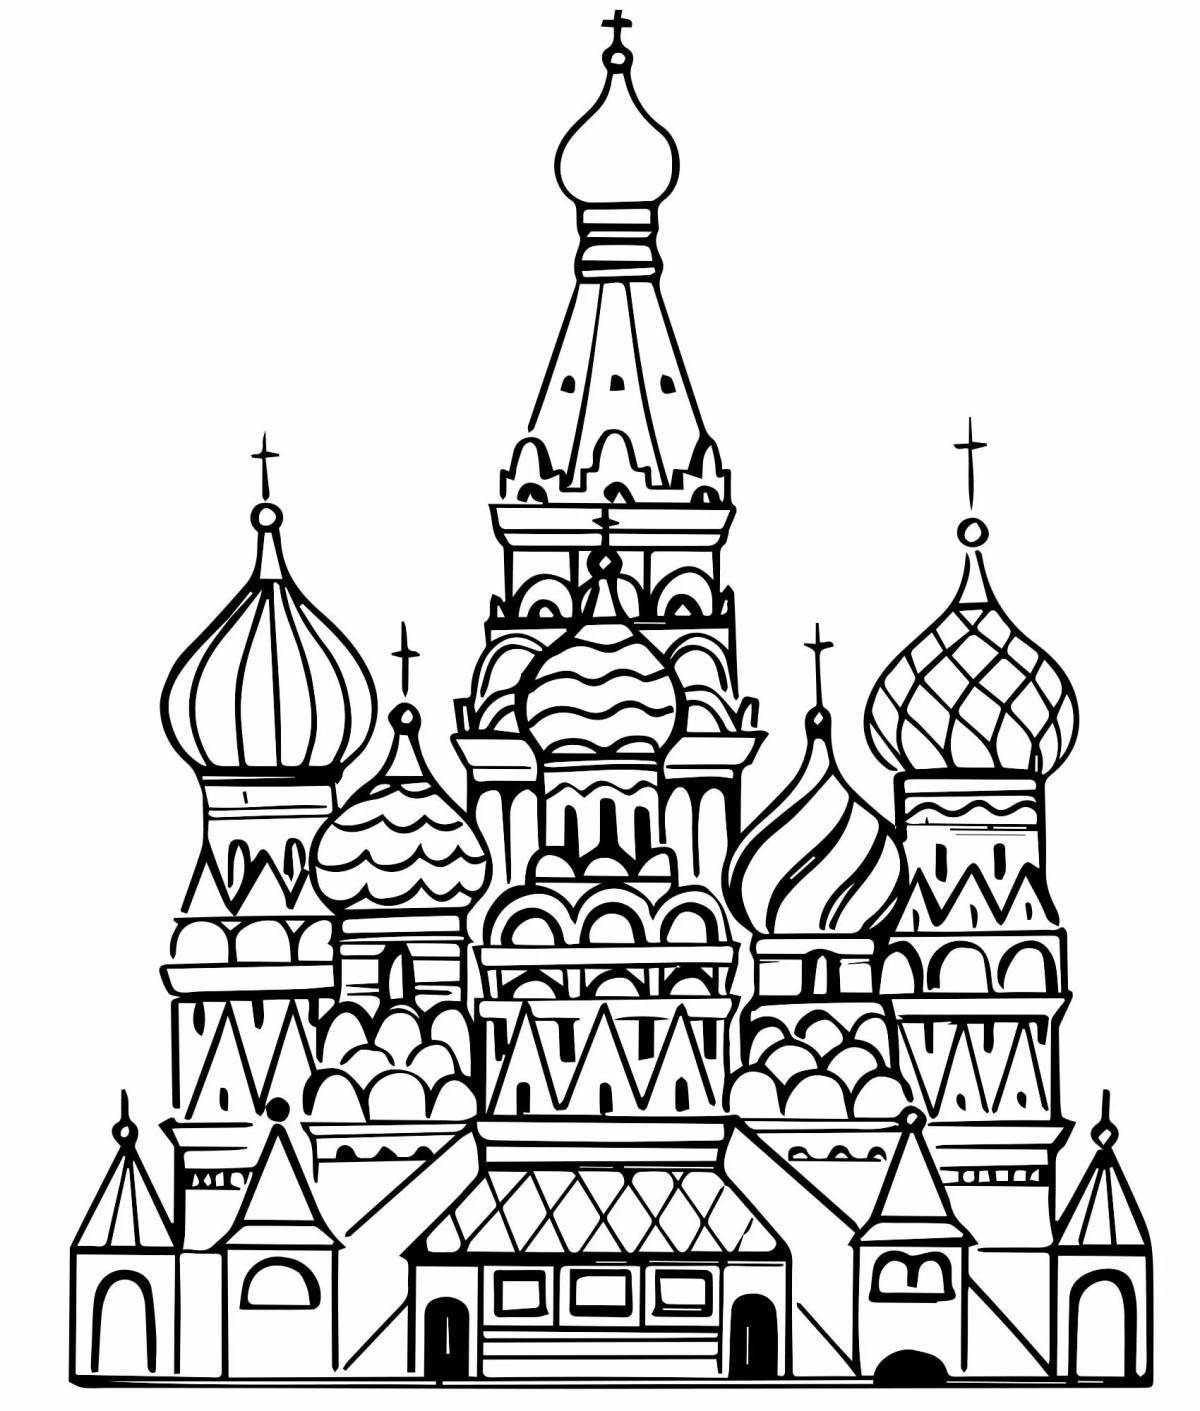 Charming moscow grade 1 coloring book